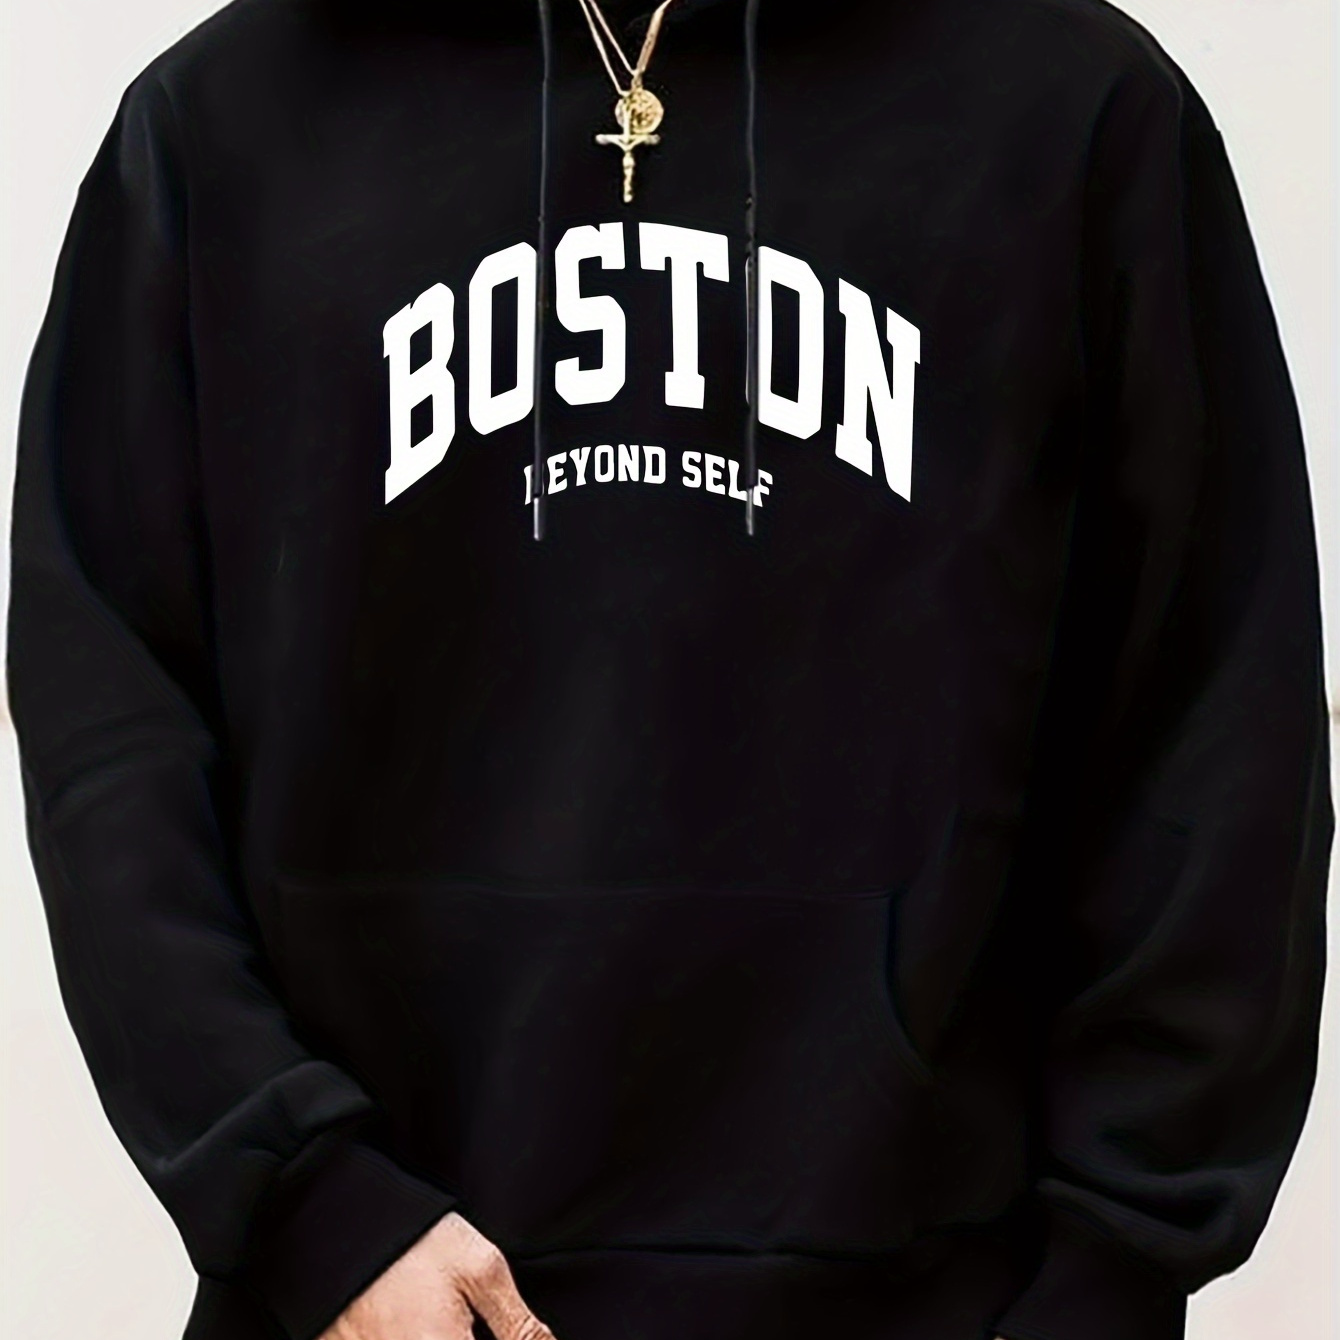 

Boston Print Men's Pullover Round Neck Hoodies With Kangaroo Pocket Long Sleeve Hooded Sweatshirt Loose Casual Top For Autumn Winter Men's Clothing As Gifts